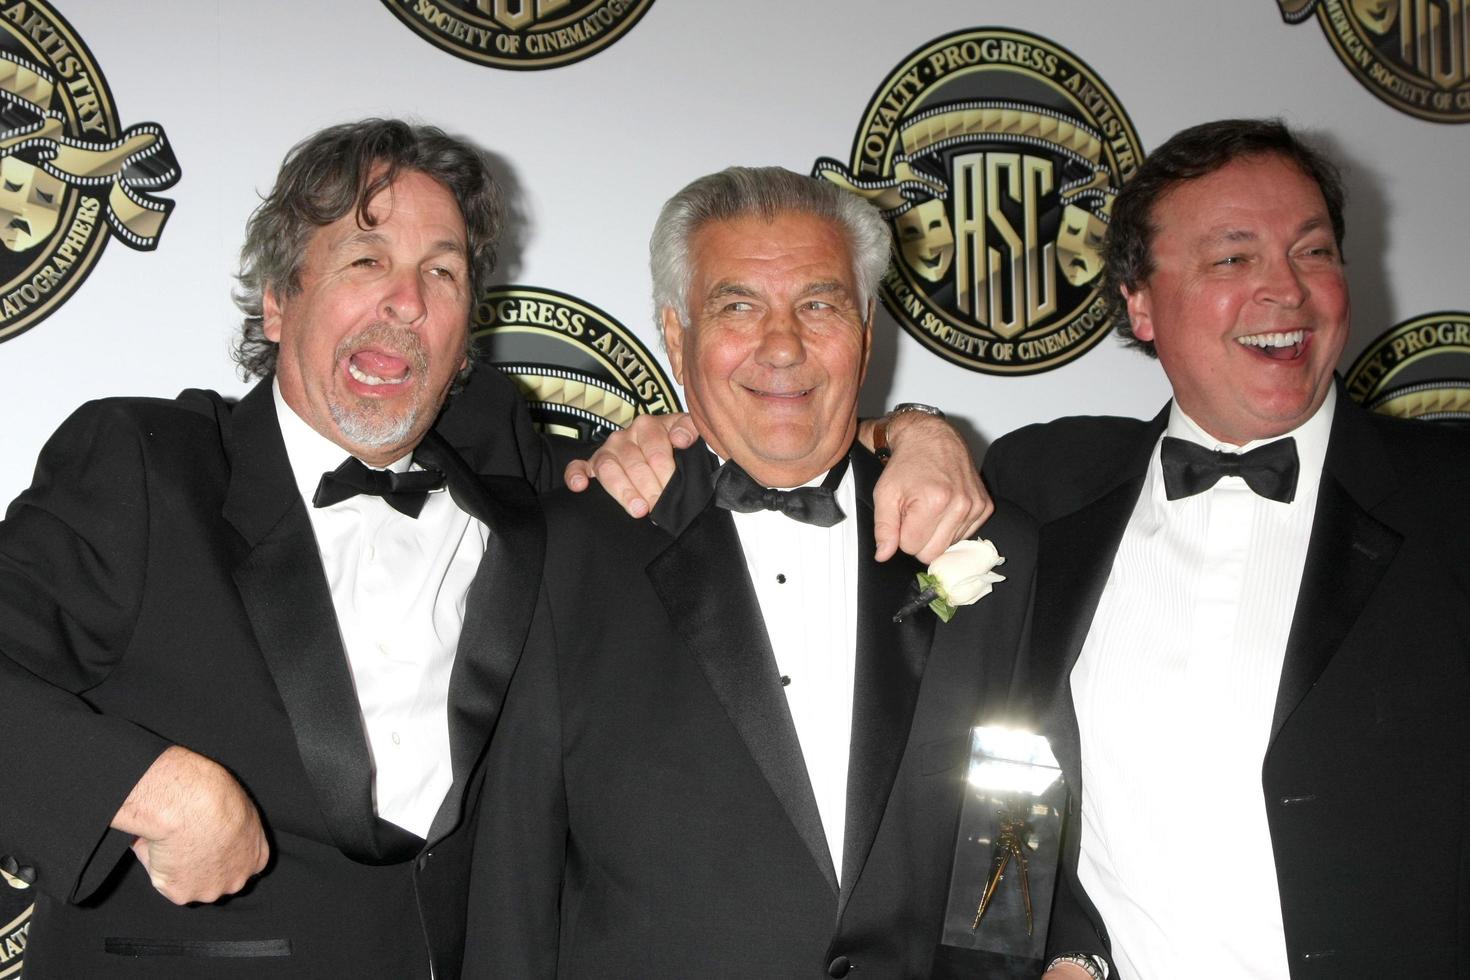 LOS ANGELES - FEB 15 - Peter Farrelly, Matthew Leonetti, Bobby Farrelly at the 2015 American Society of Cinematographers Awards at a Century Plaza Hotel on February 15, 2015 in Century City, CA photo